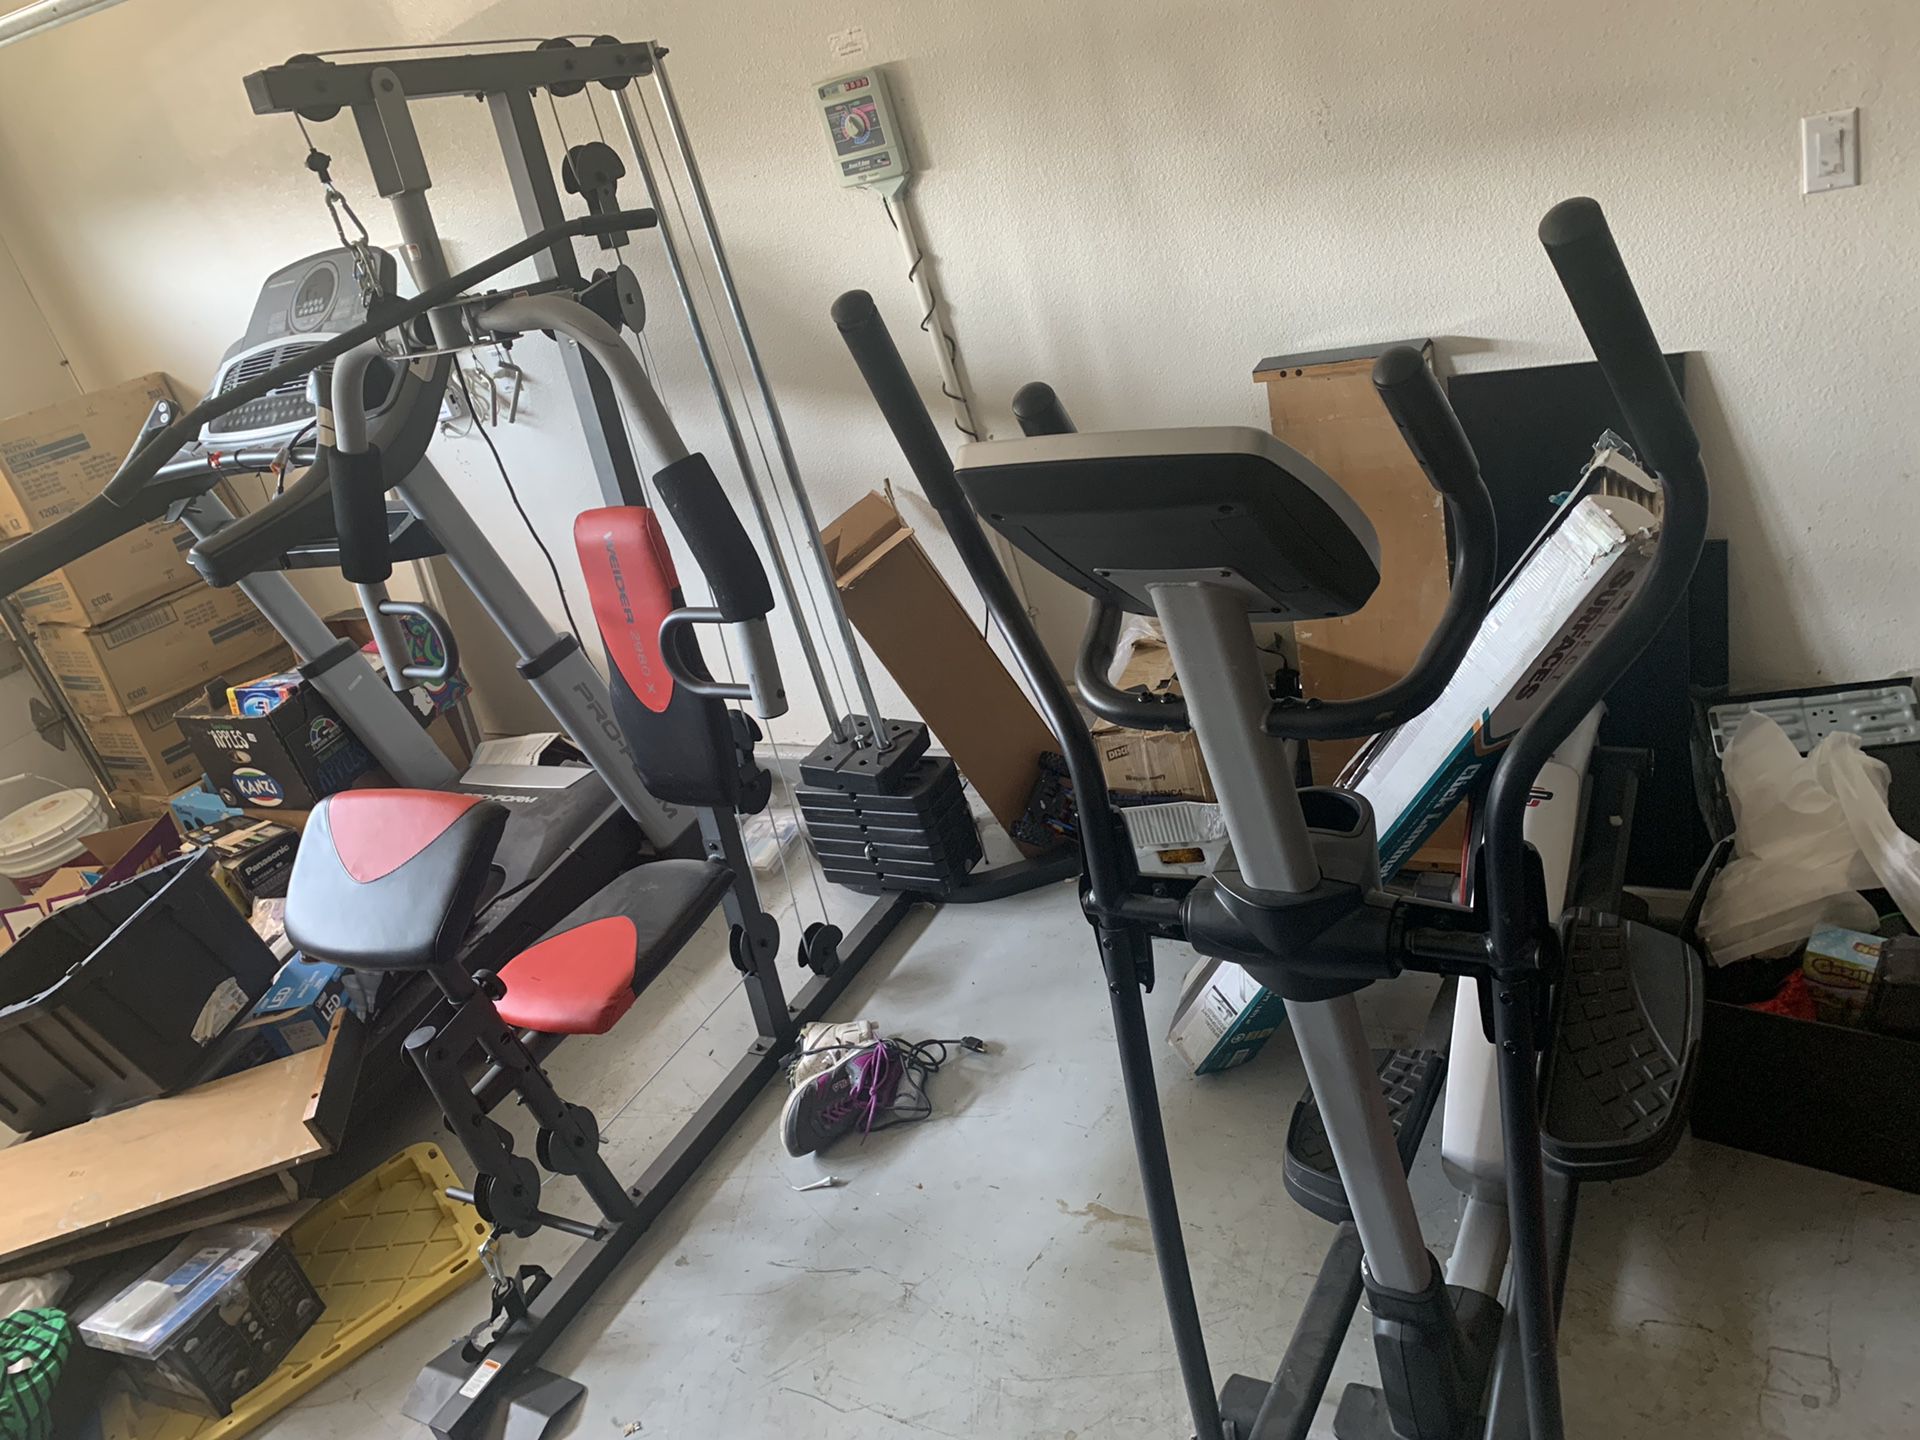 2 great workout machines